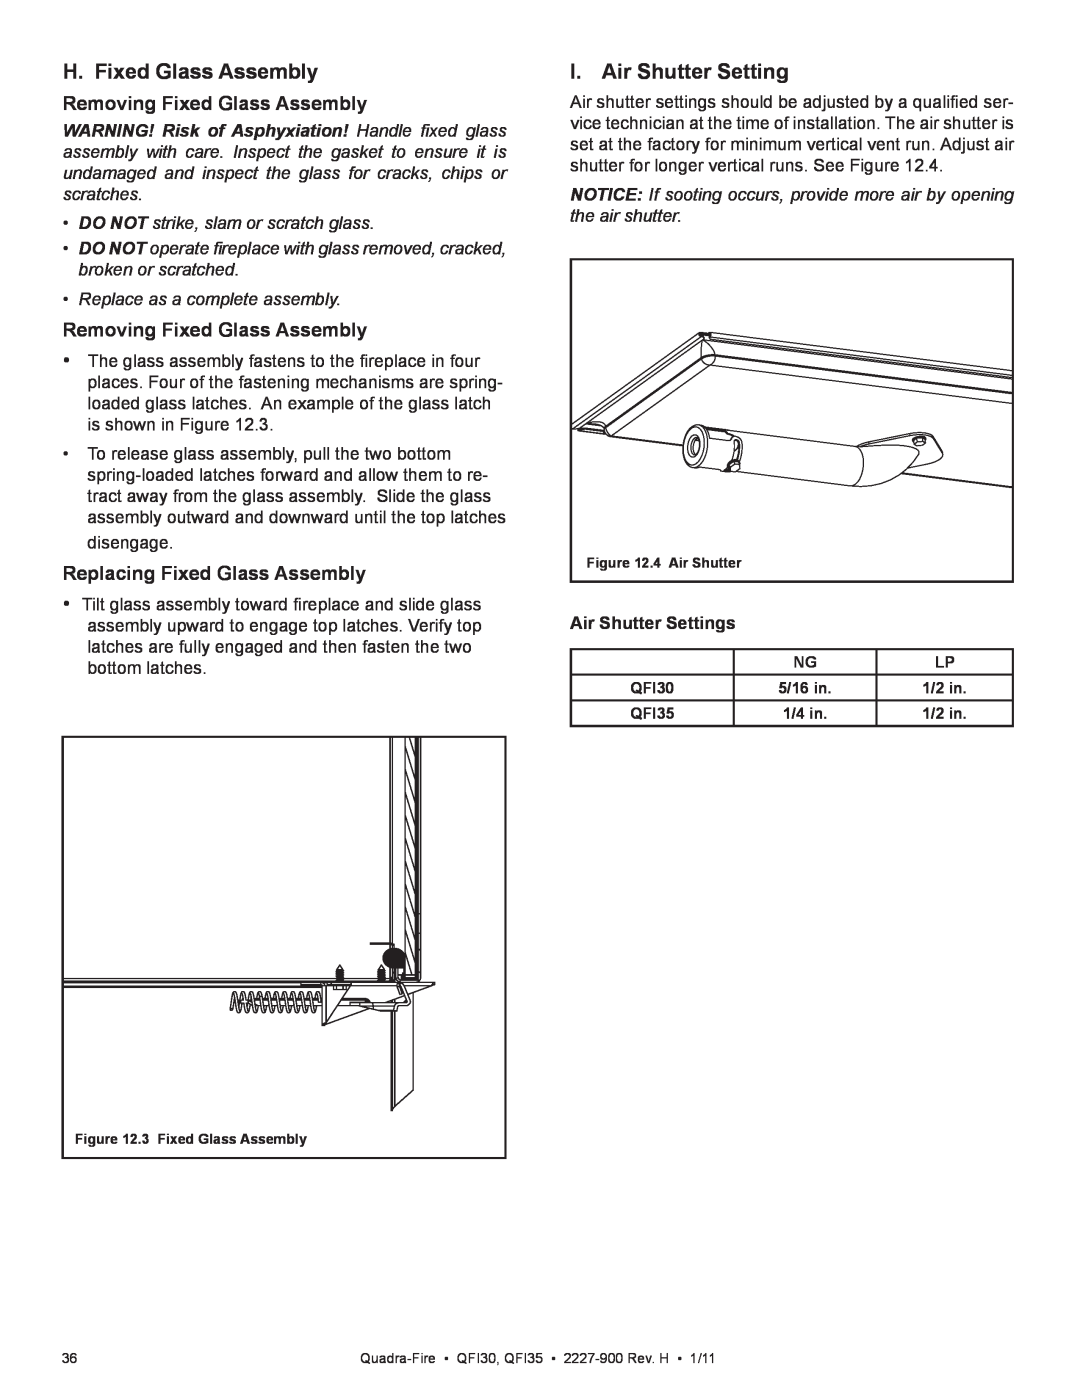 Quadra-Fire QF130 owner manual H. Fixed Glass Assembly, I. Air Shutter Setting, Removing Fixed Glass Assembly 